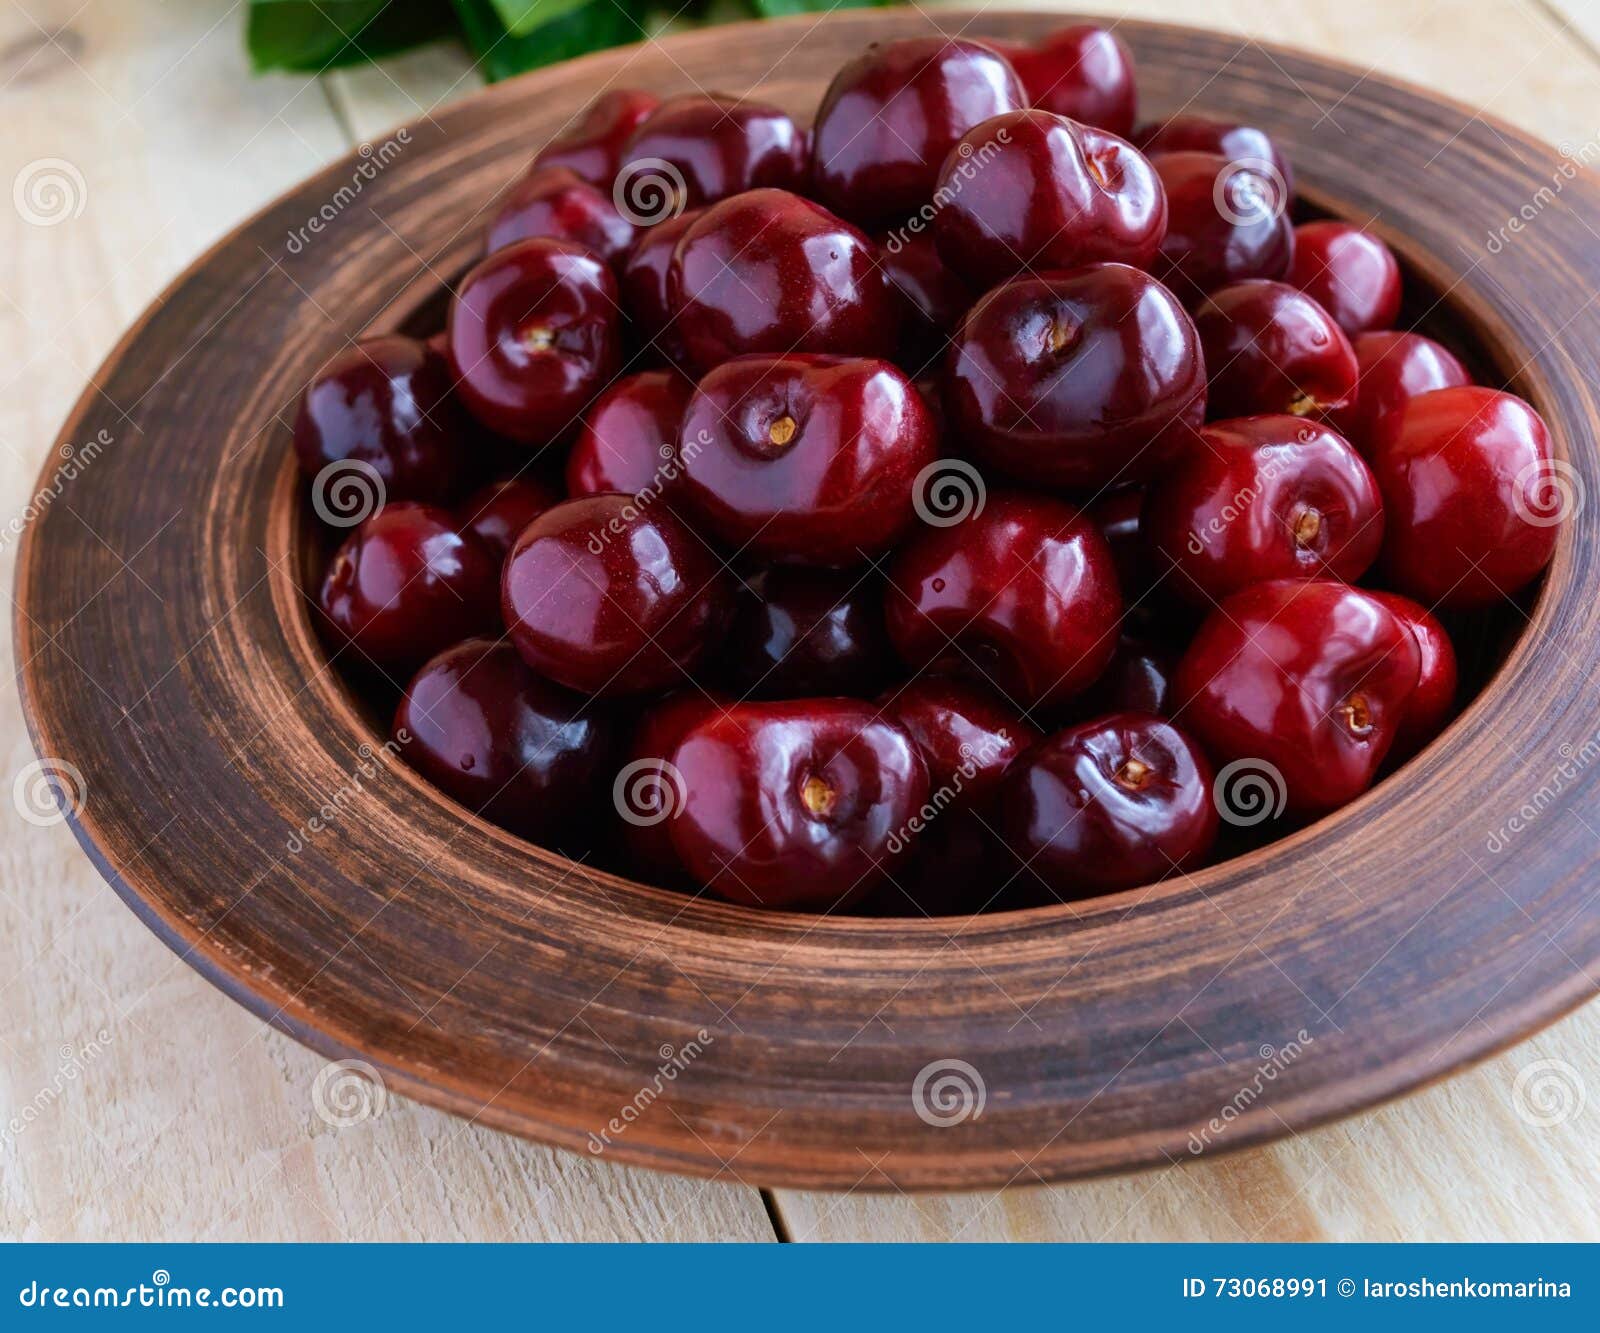 Ripe black cherries in a clay bowl on a light wooden background. Close-up.